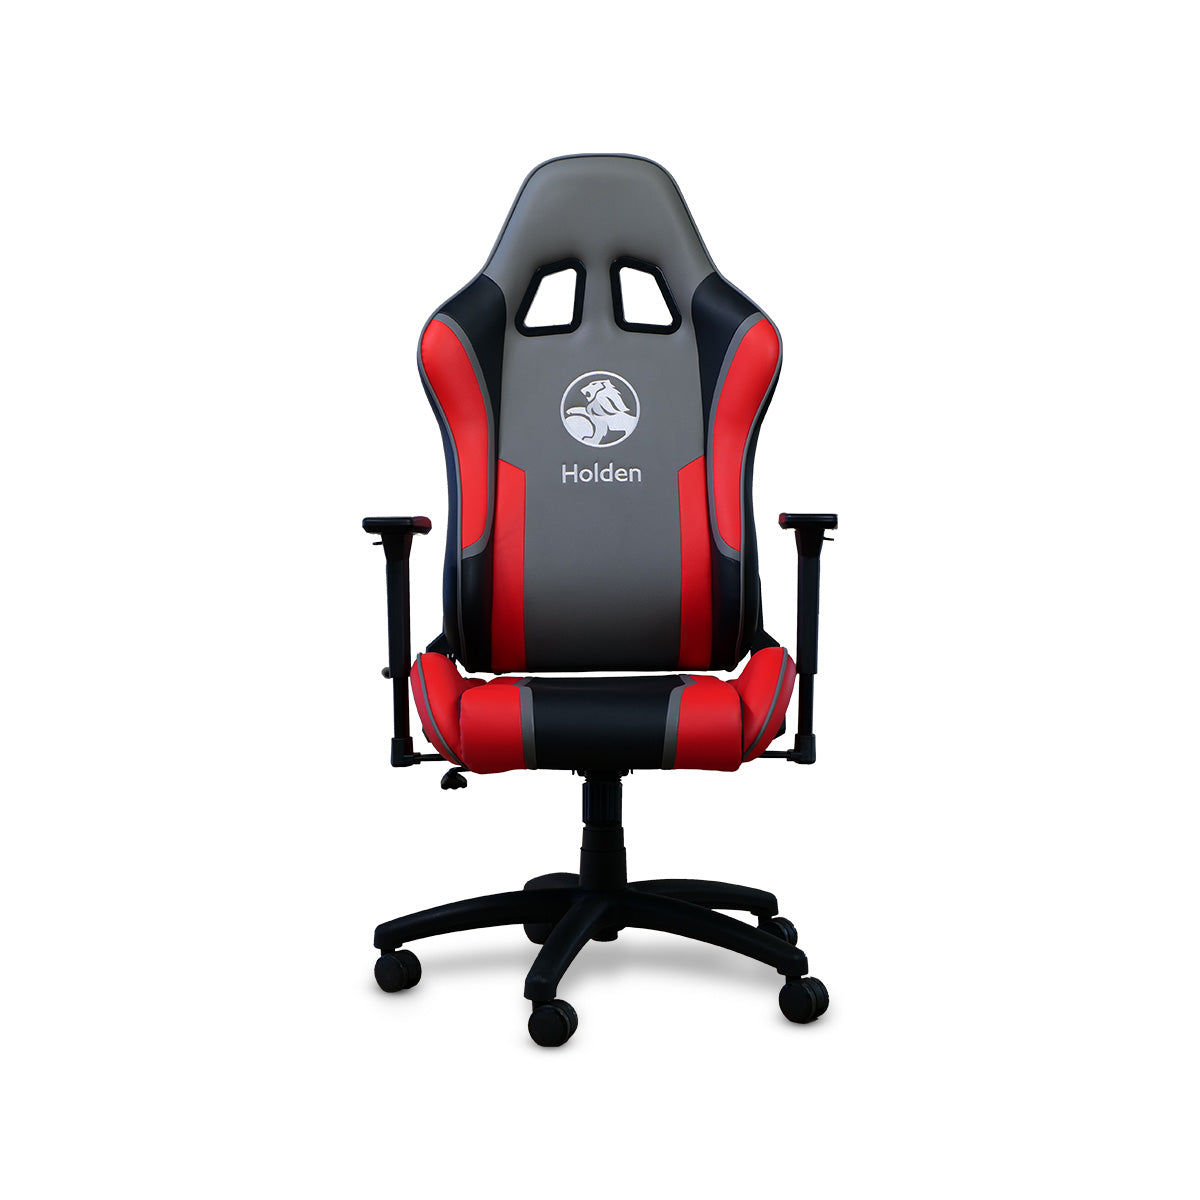 Holden Gaming Chair